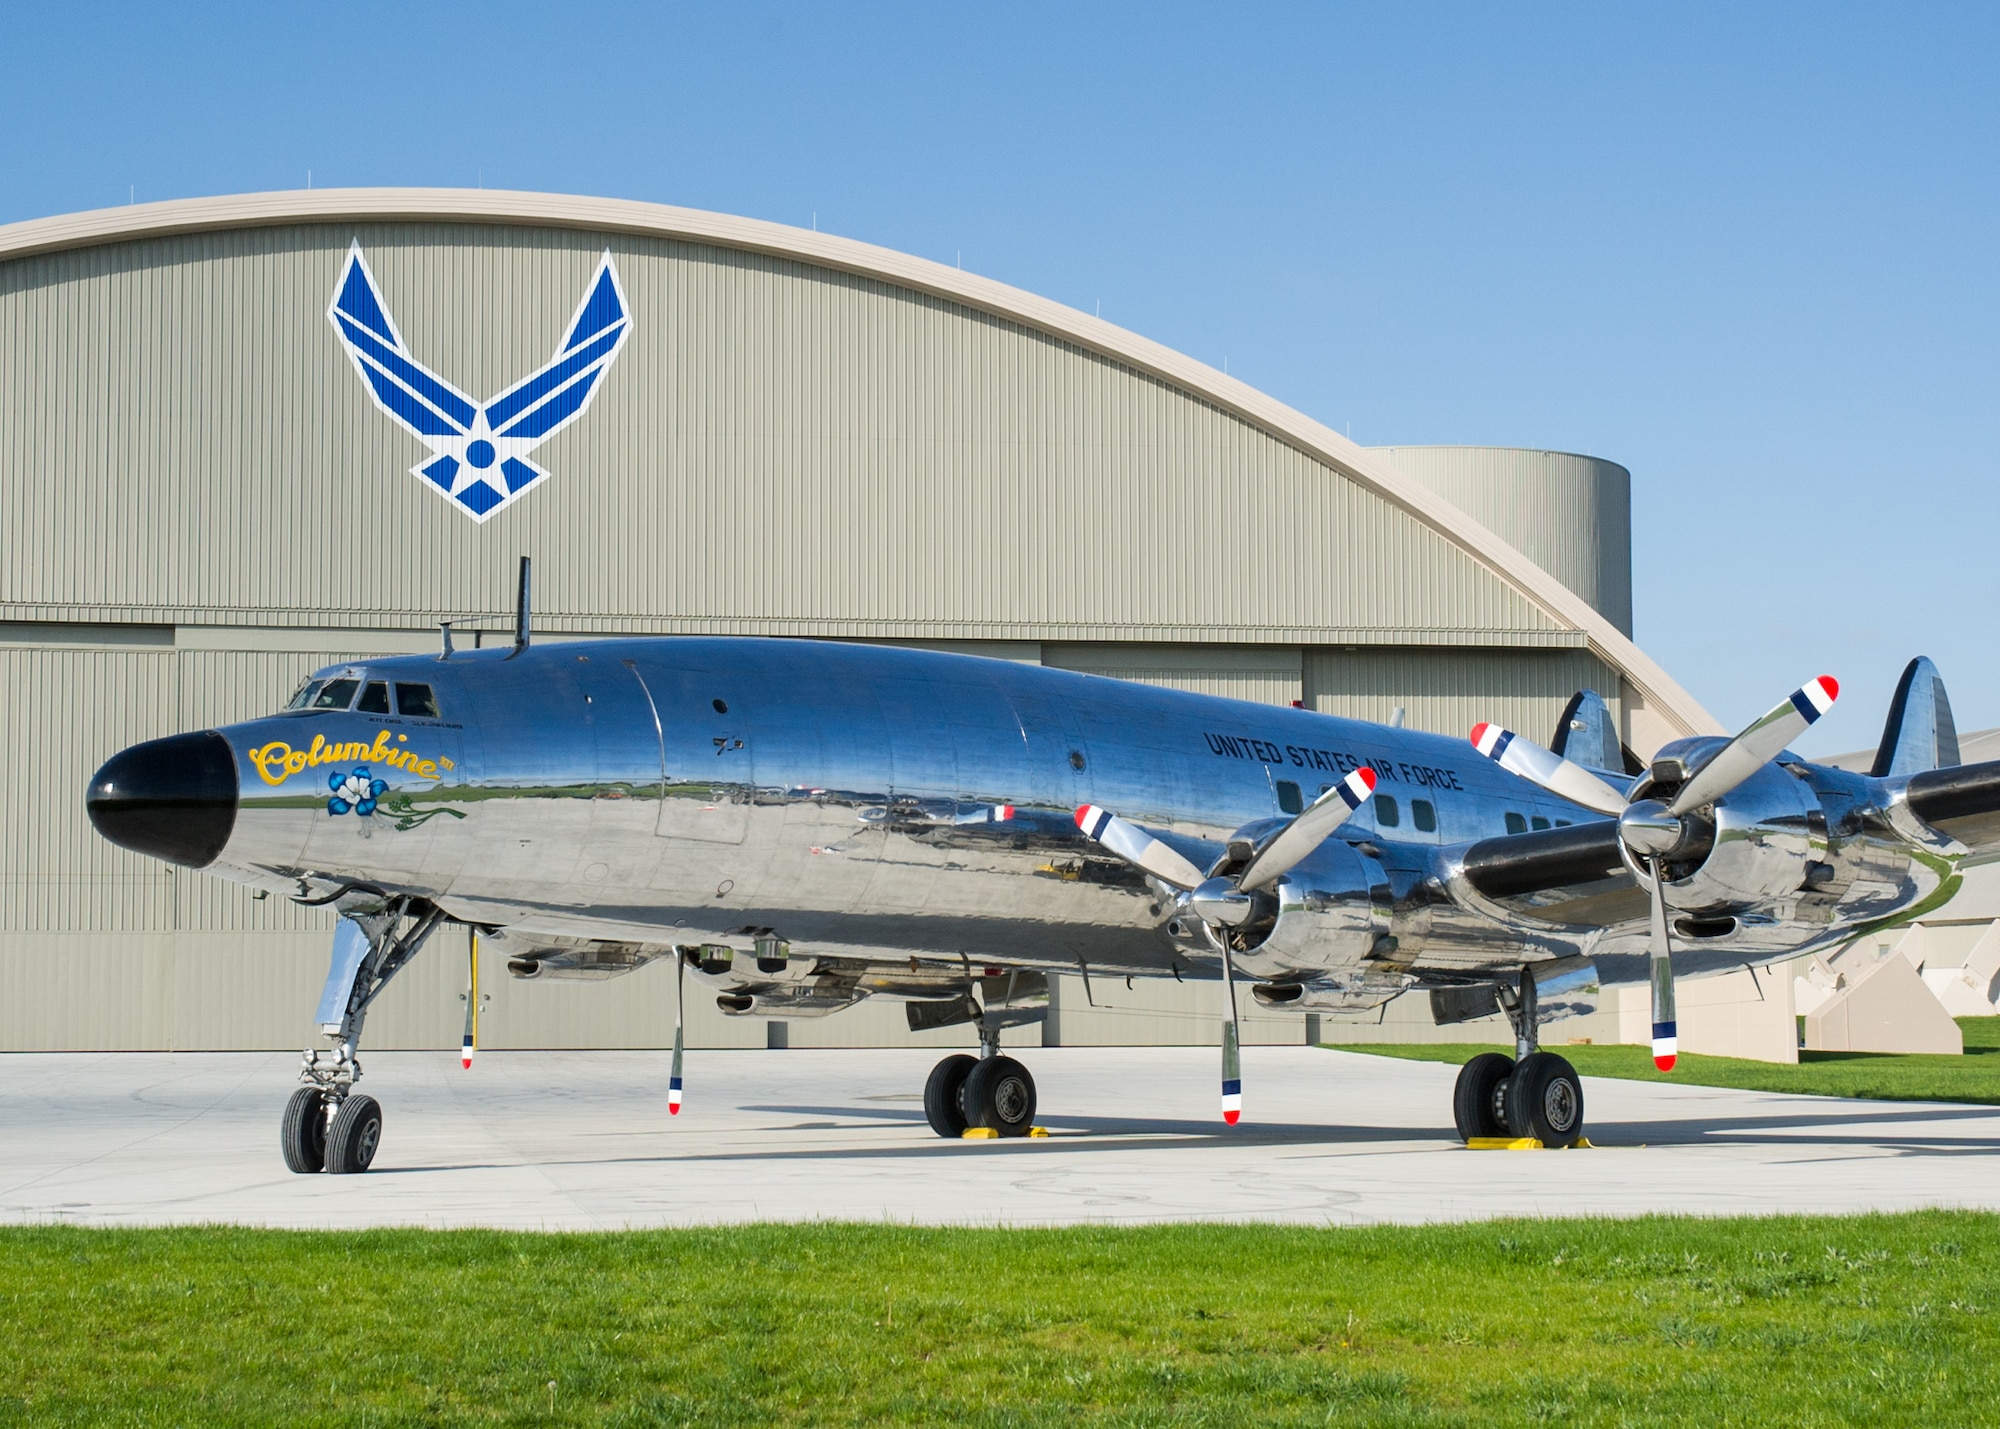 DAYTON, Ohio -- The Lockheed VC-121E “Columbine III” at the National Museum of the United States Air Force on April 23, 2016. This aircraft is one of ten Presidential aircraft in the collection. (U.S. Air Force photo by Ken LaRock)
